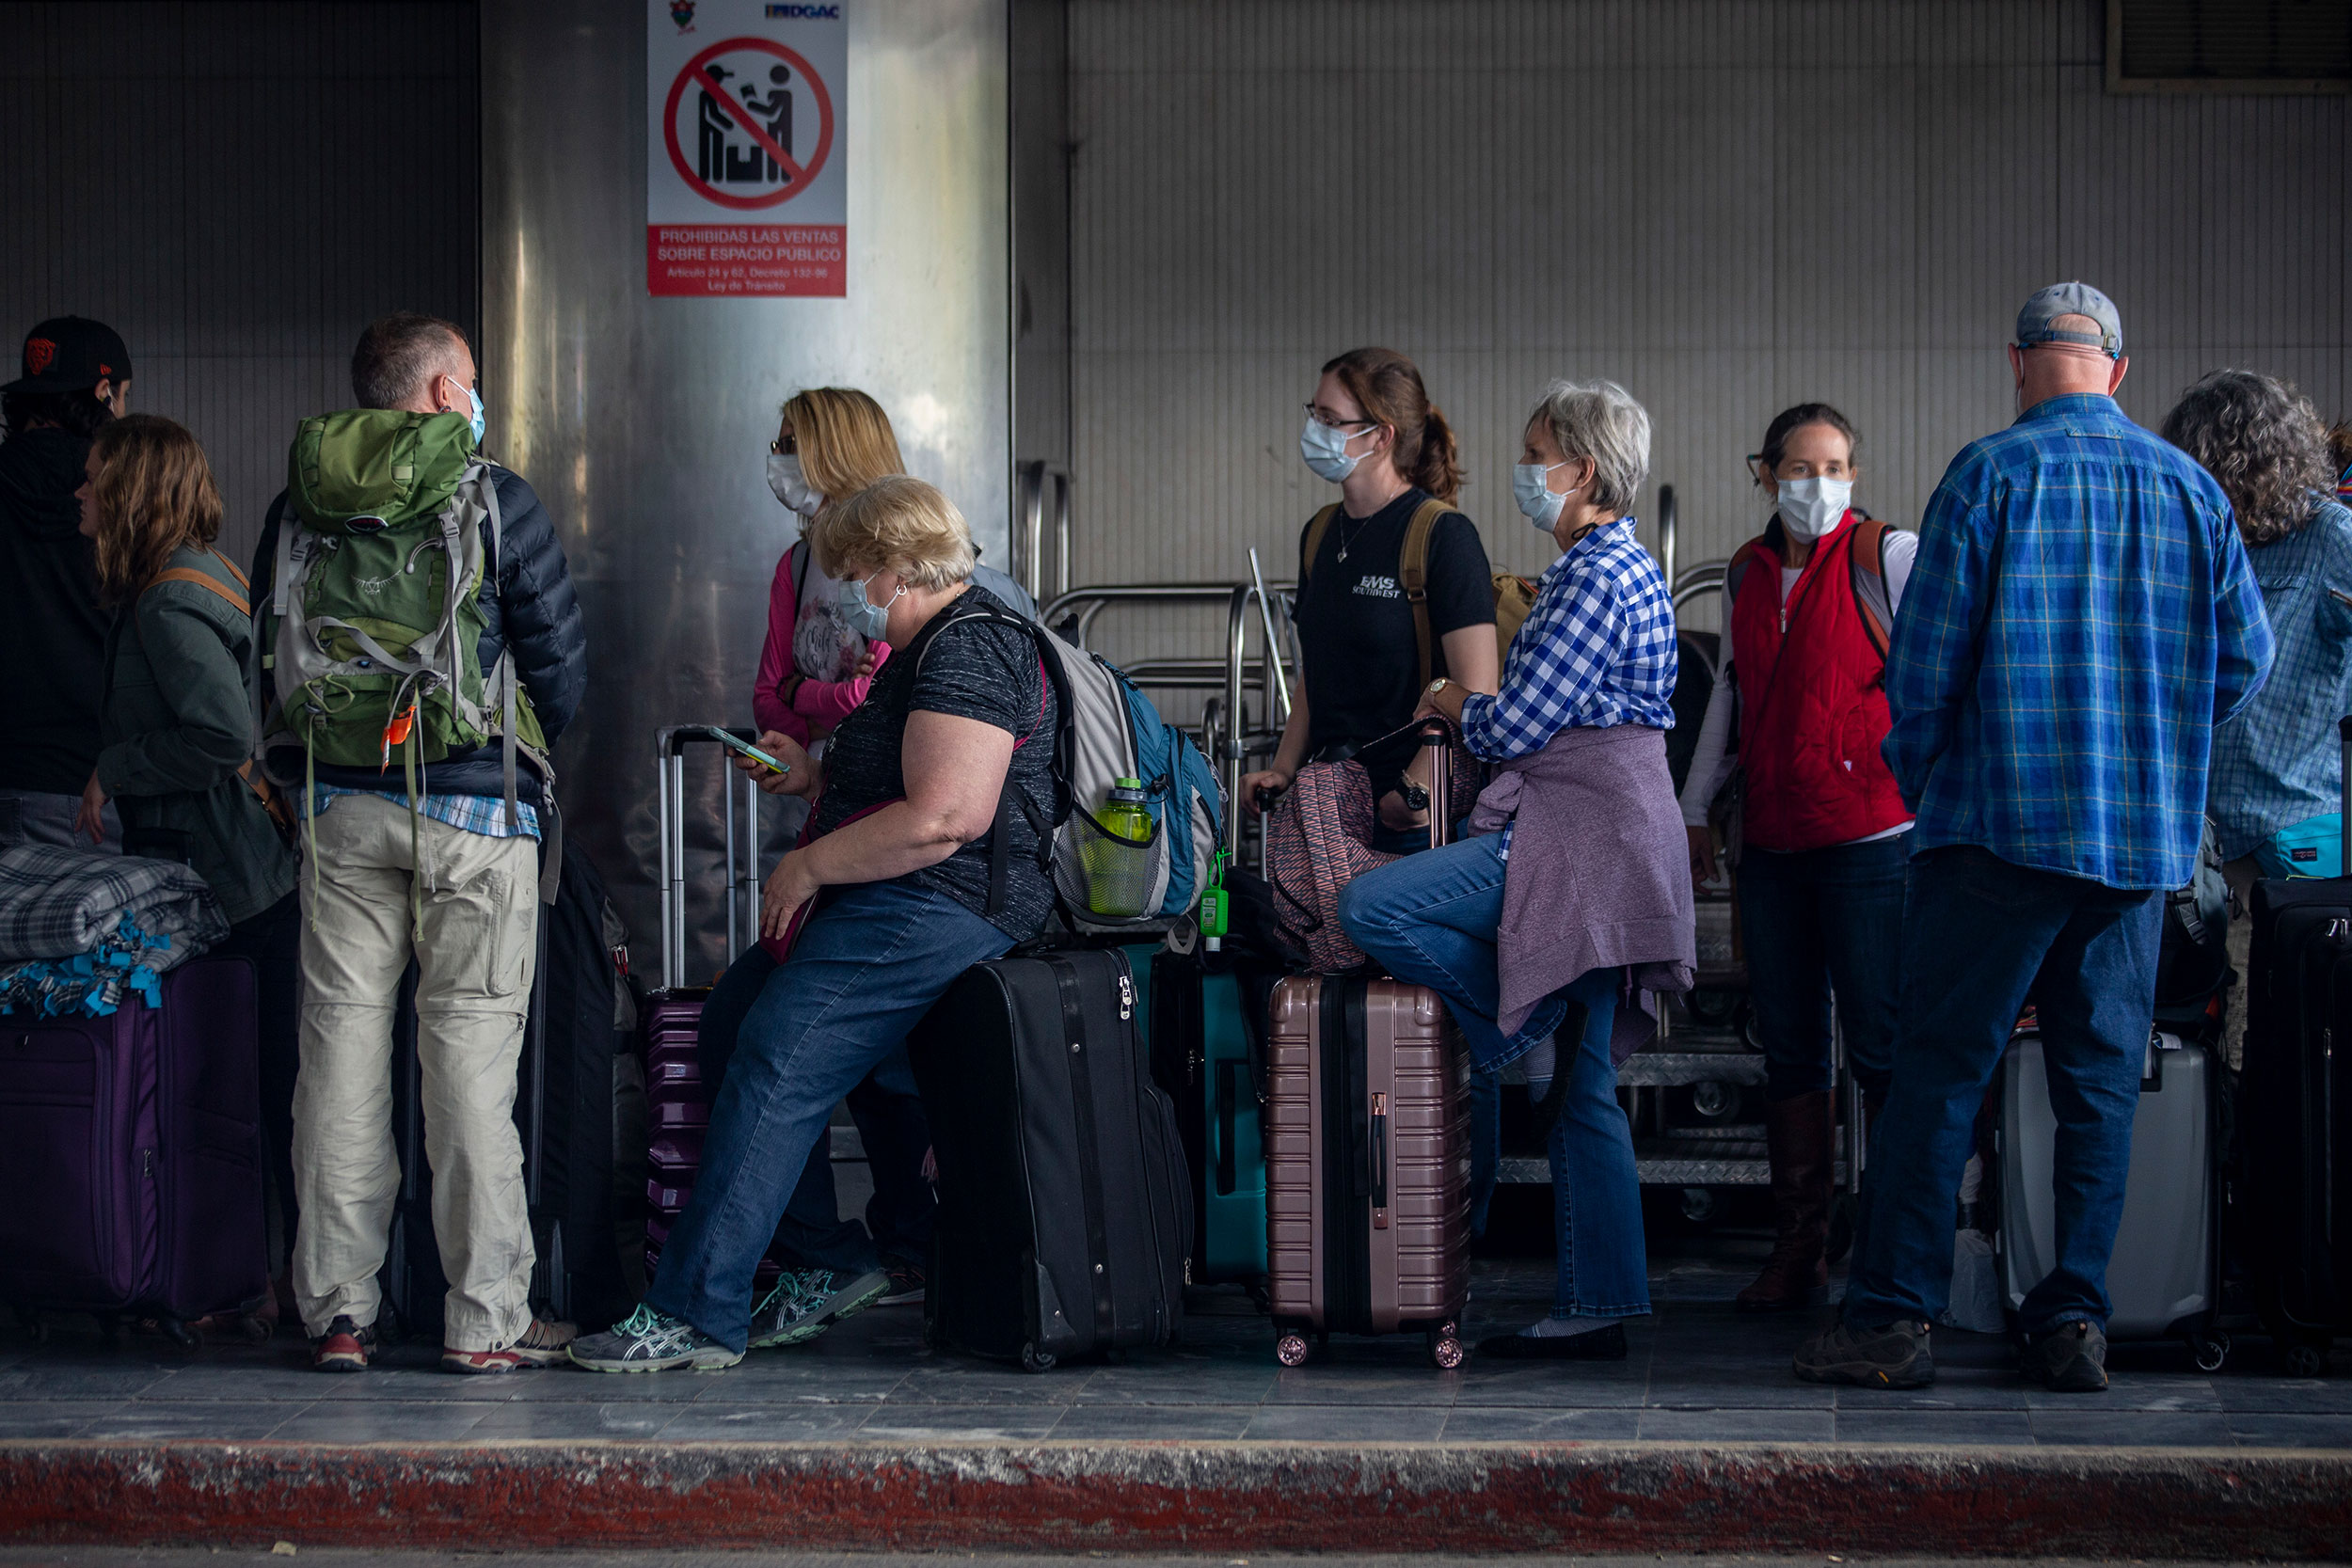 Travelers wait in line for a charter flight back to the United States at La Aurora International Airport in Guatemala on Monday, March 23.